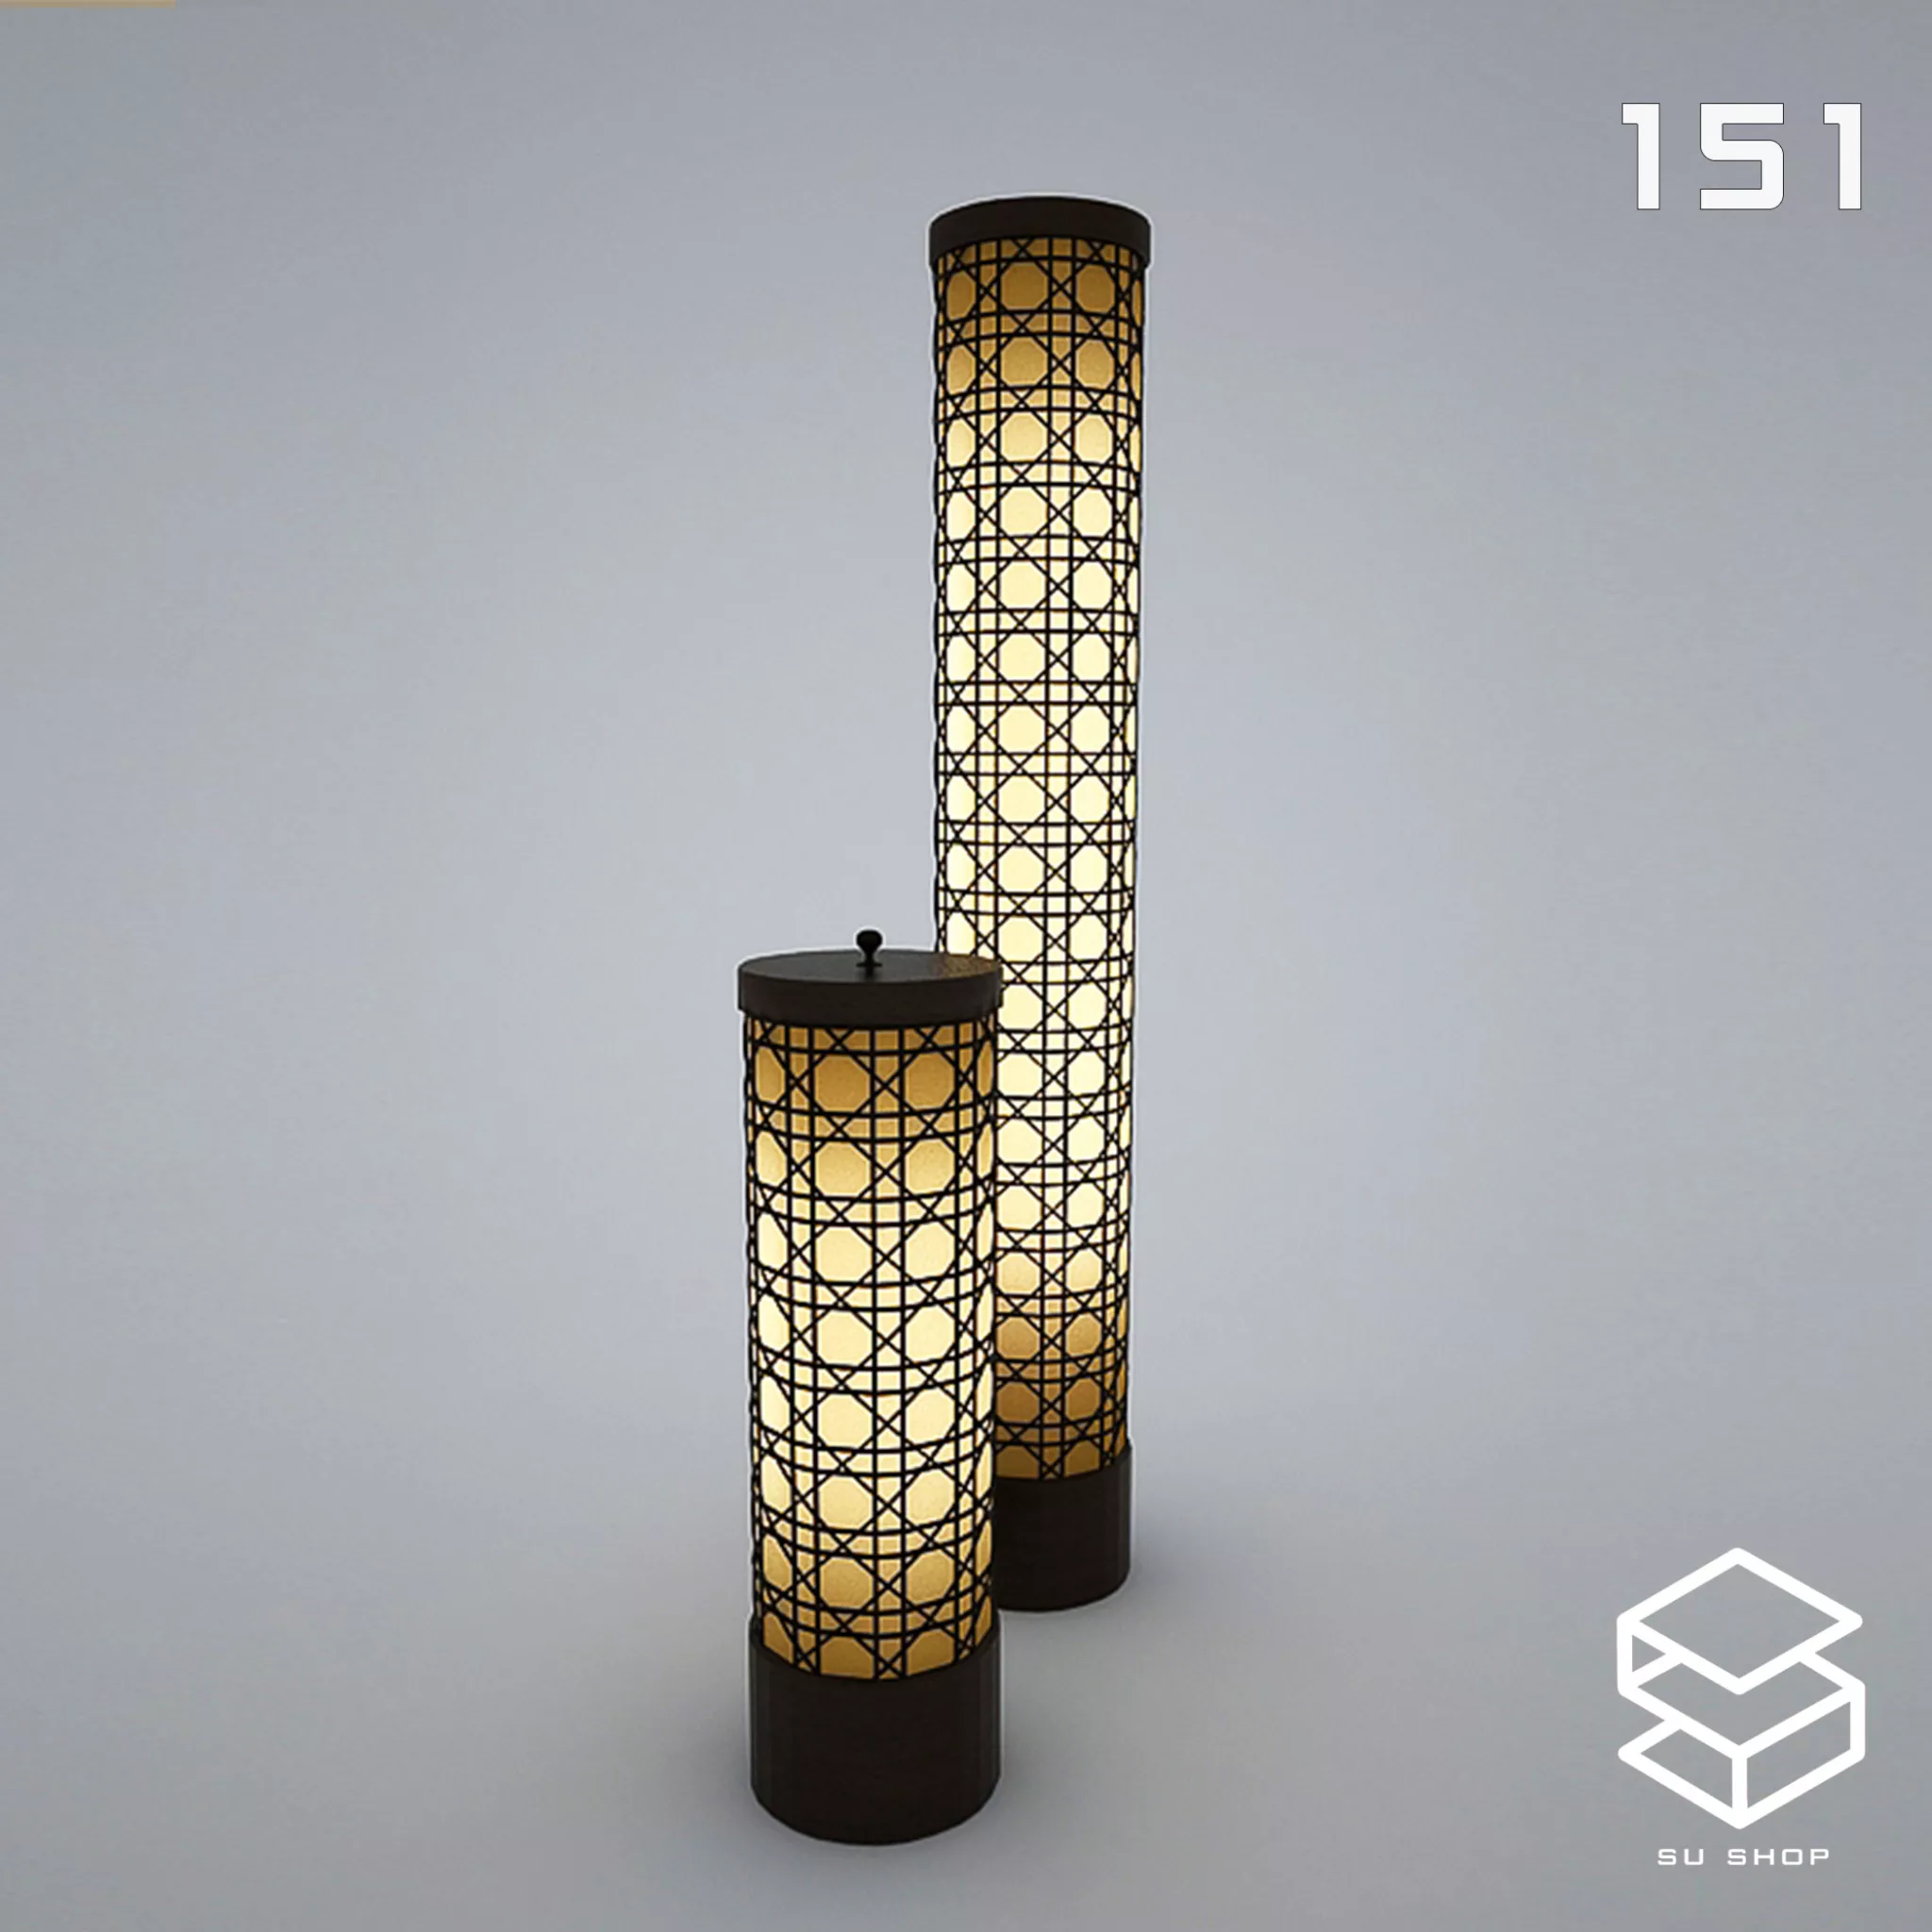 MODERN TABLE LAMP - SKETCHUP 3D MODEL - VRAY OR ENSCAPE - ID14721